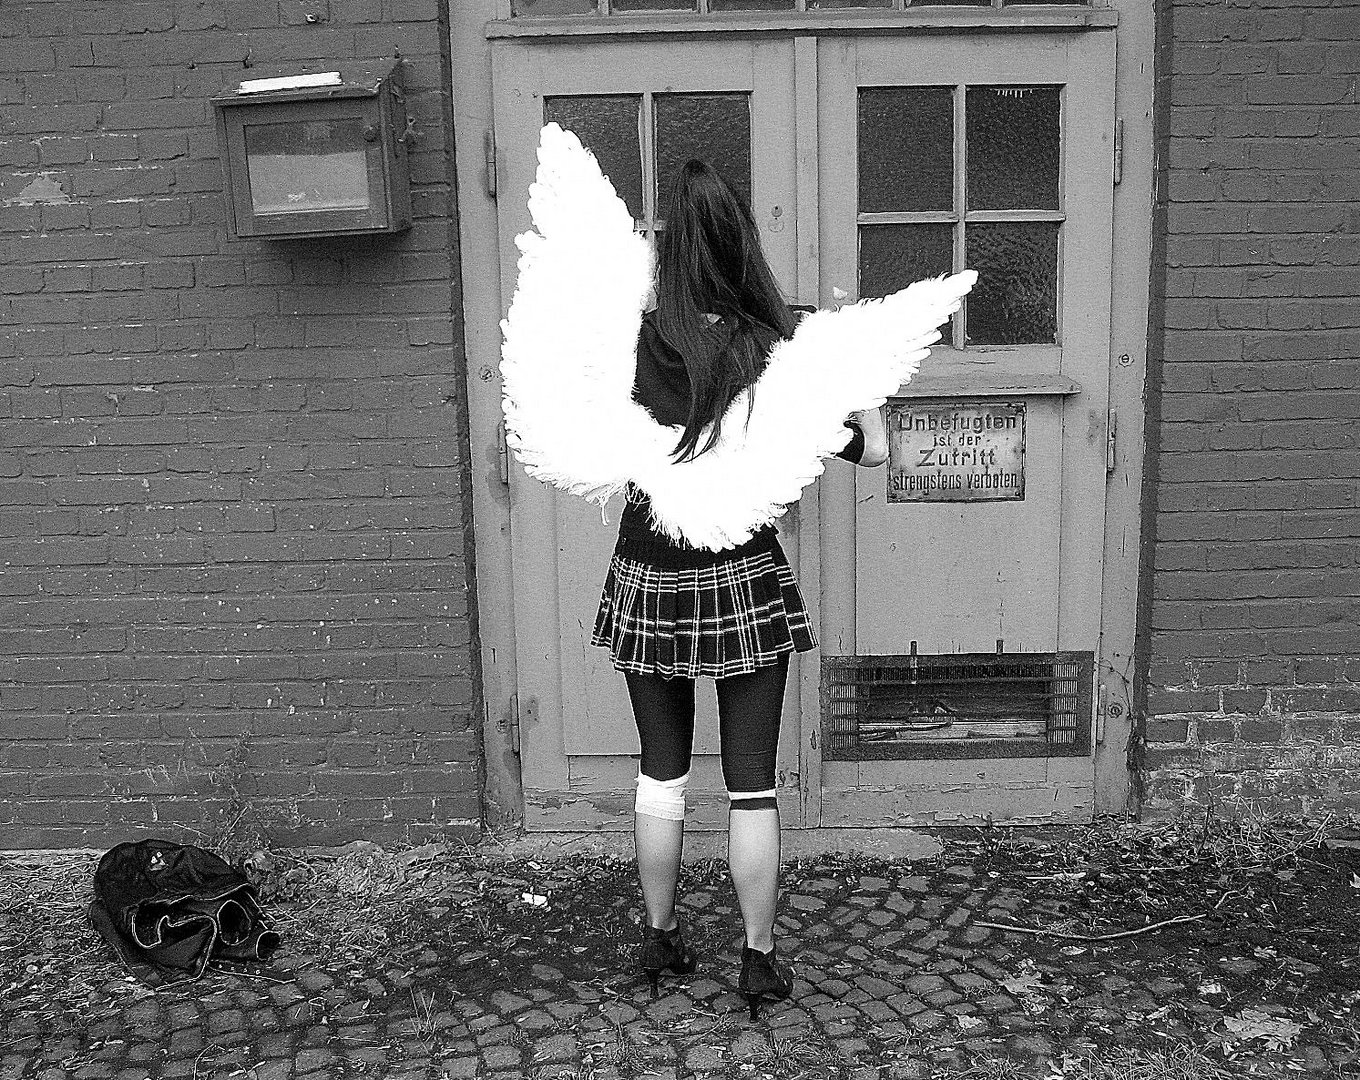 "No fallen Angel" leaves her home in the morning